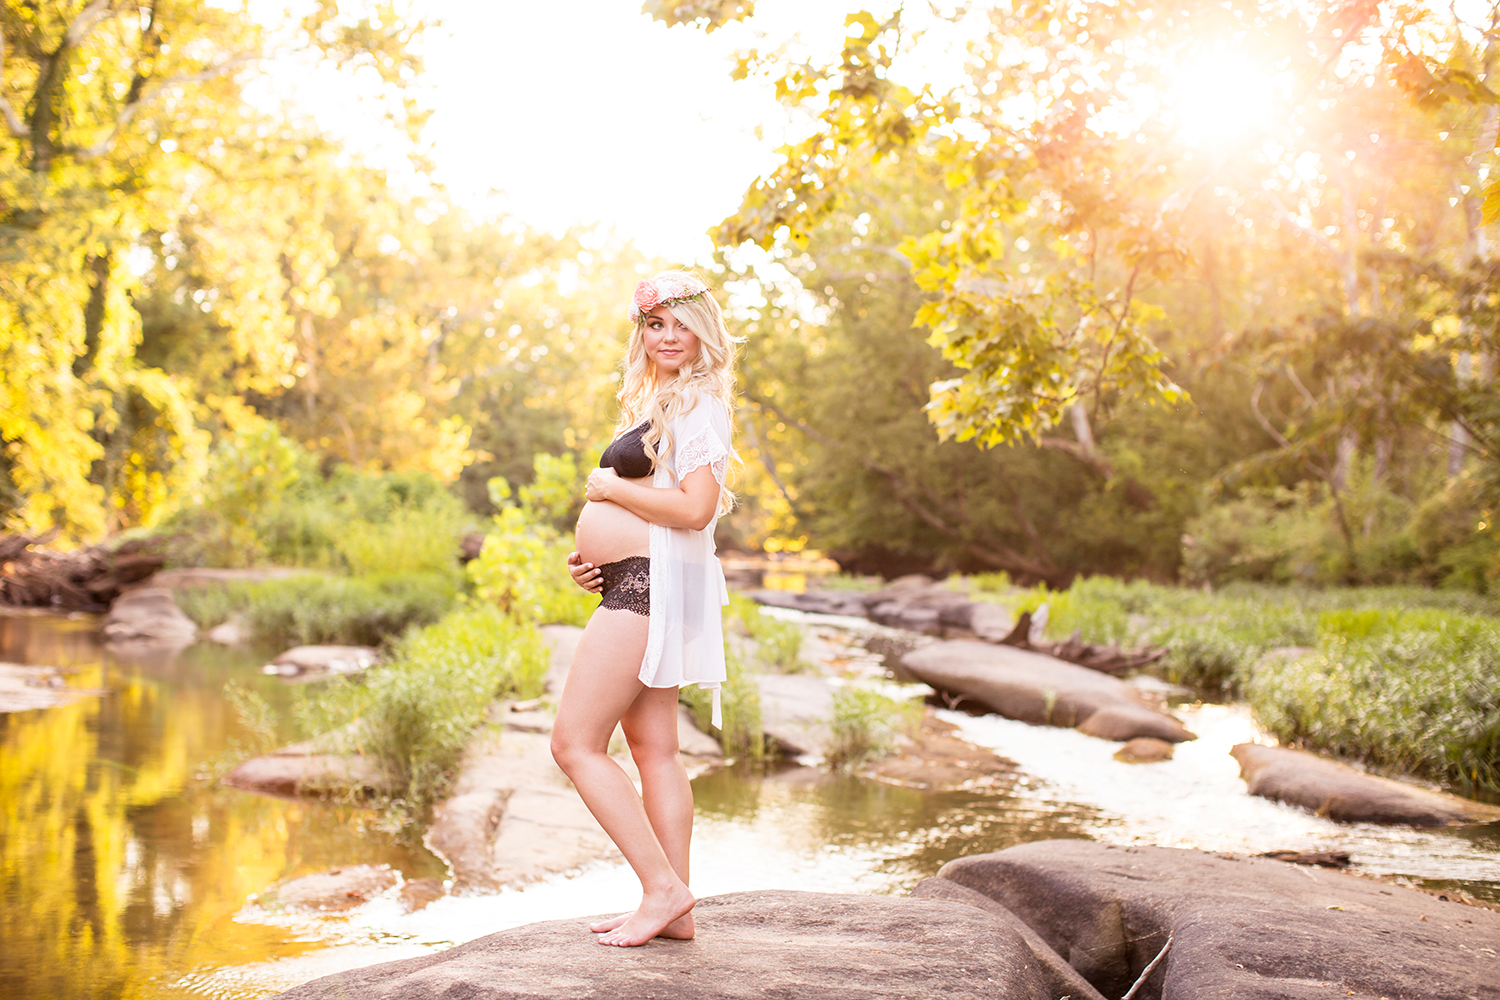 Outdoor Maternity Boudoir on the River - Image Property of www.j-dphoto.com